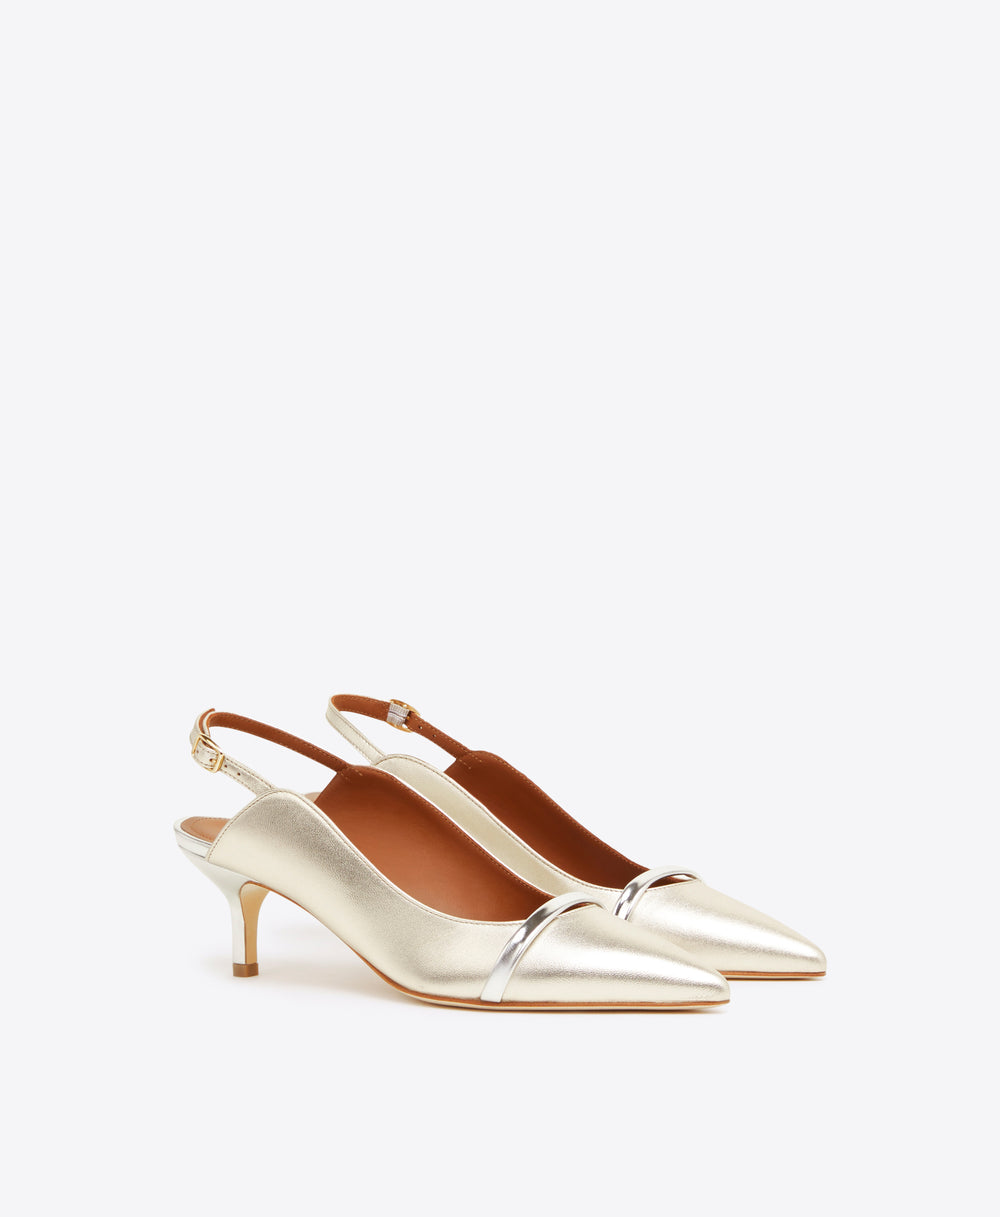 Marion 70 Platino Metallic Leather Slingback Heels | Malone Souliers